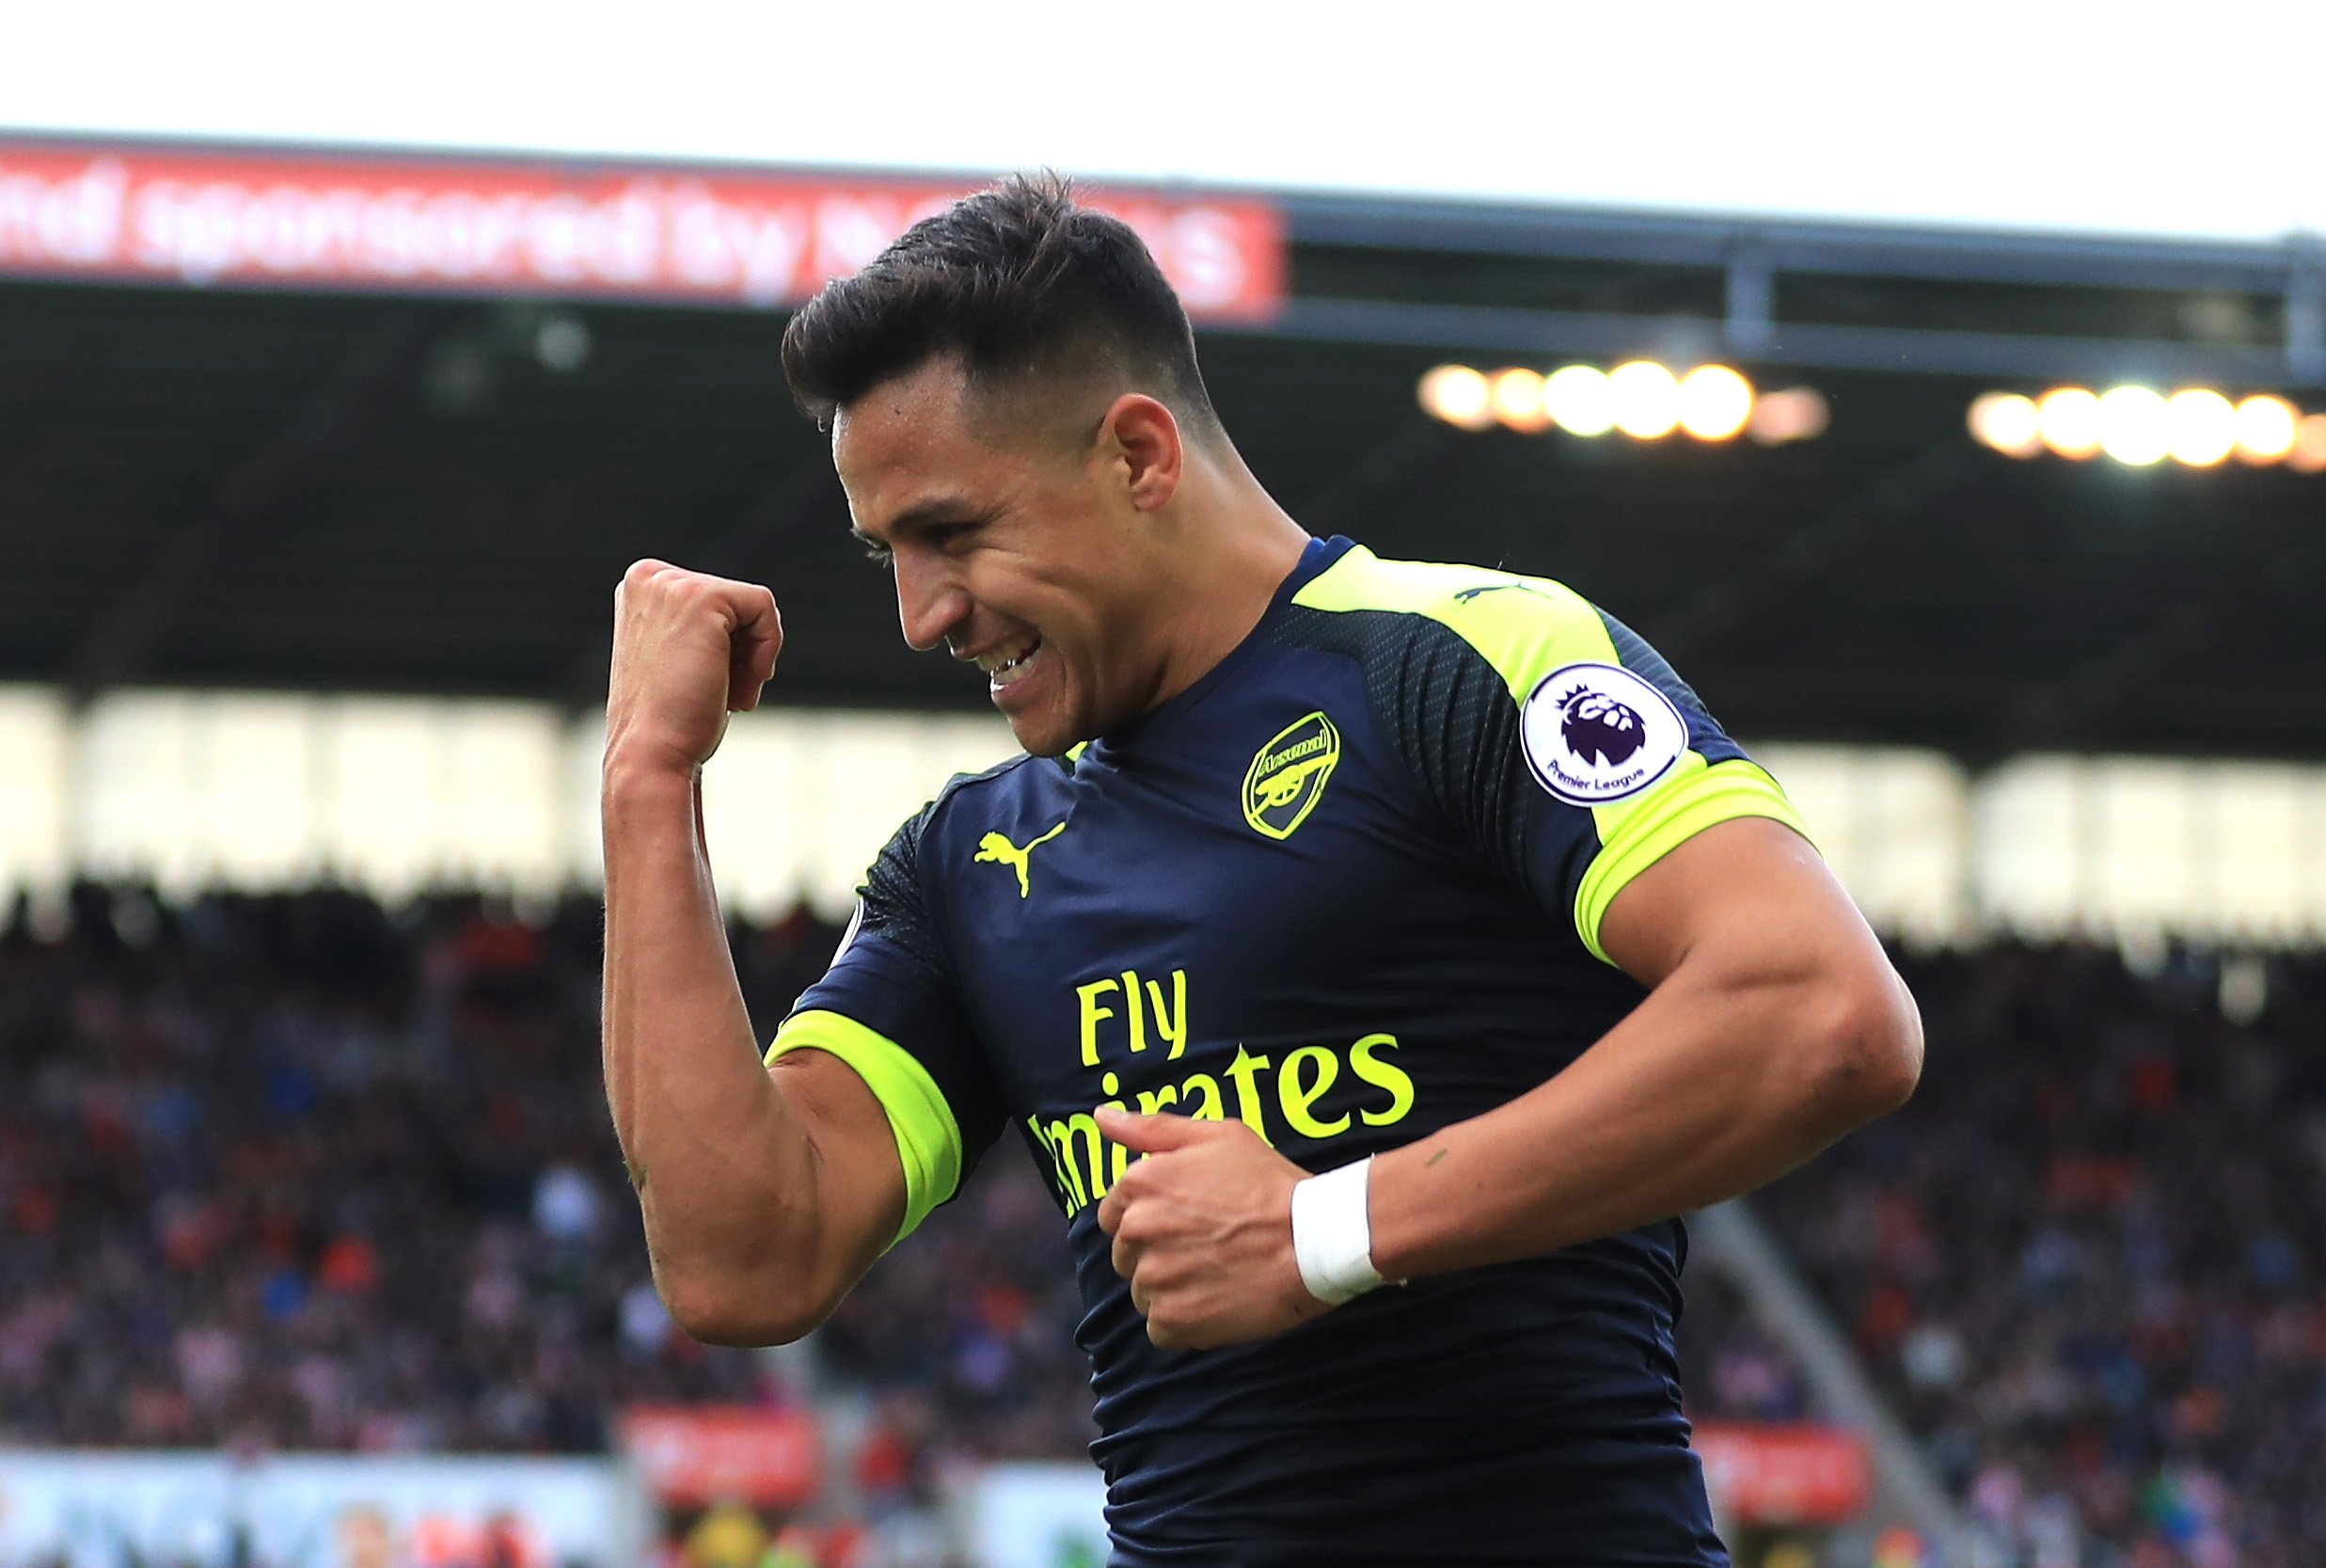 STOKE ON TRENT, ENGLAND - MAY 13:  Alexis Sanchez of Arsenal celebrates scoring his sides third goal during the Premier League match between Stoke City and Arsenal at Bet365 Stadium on May 13, 2017 in Stoke on Trent, England.  (Photo by Richard Heathcote/Getty Images)